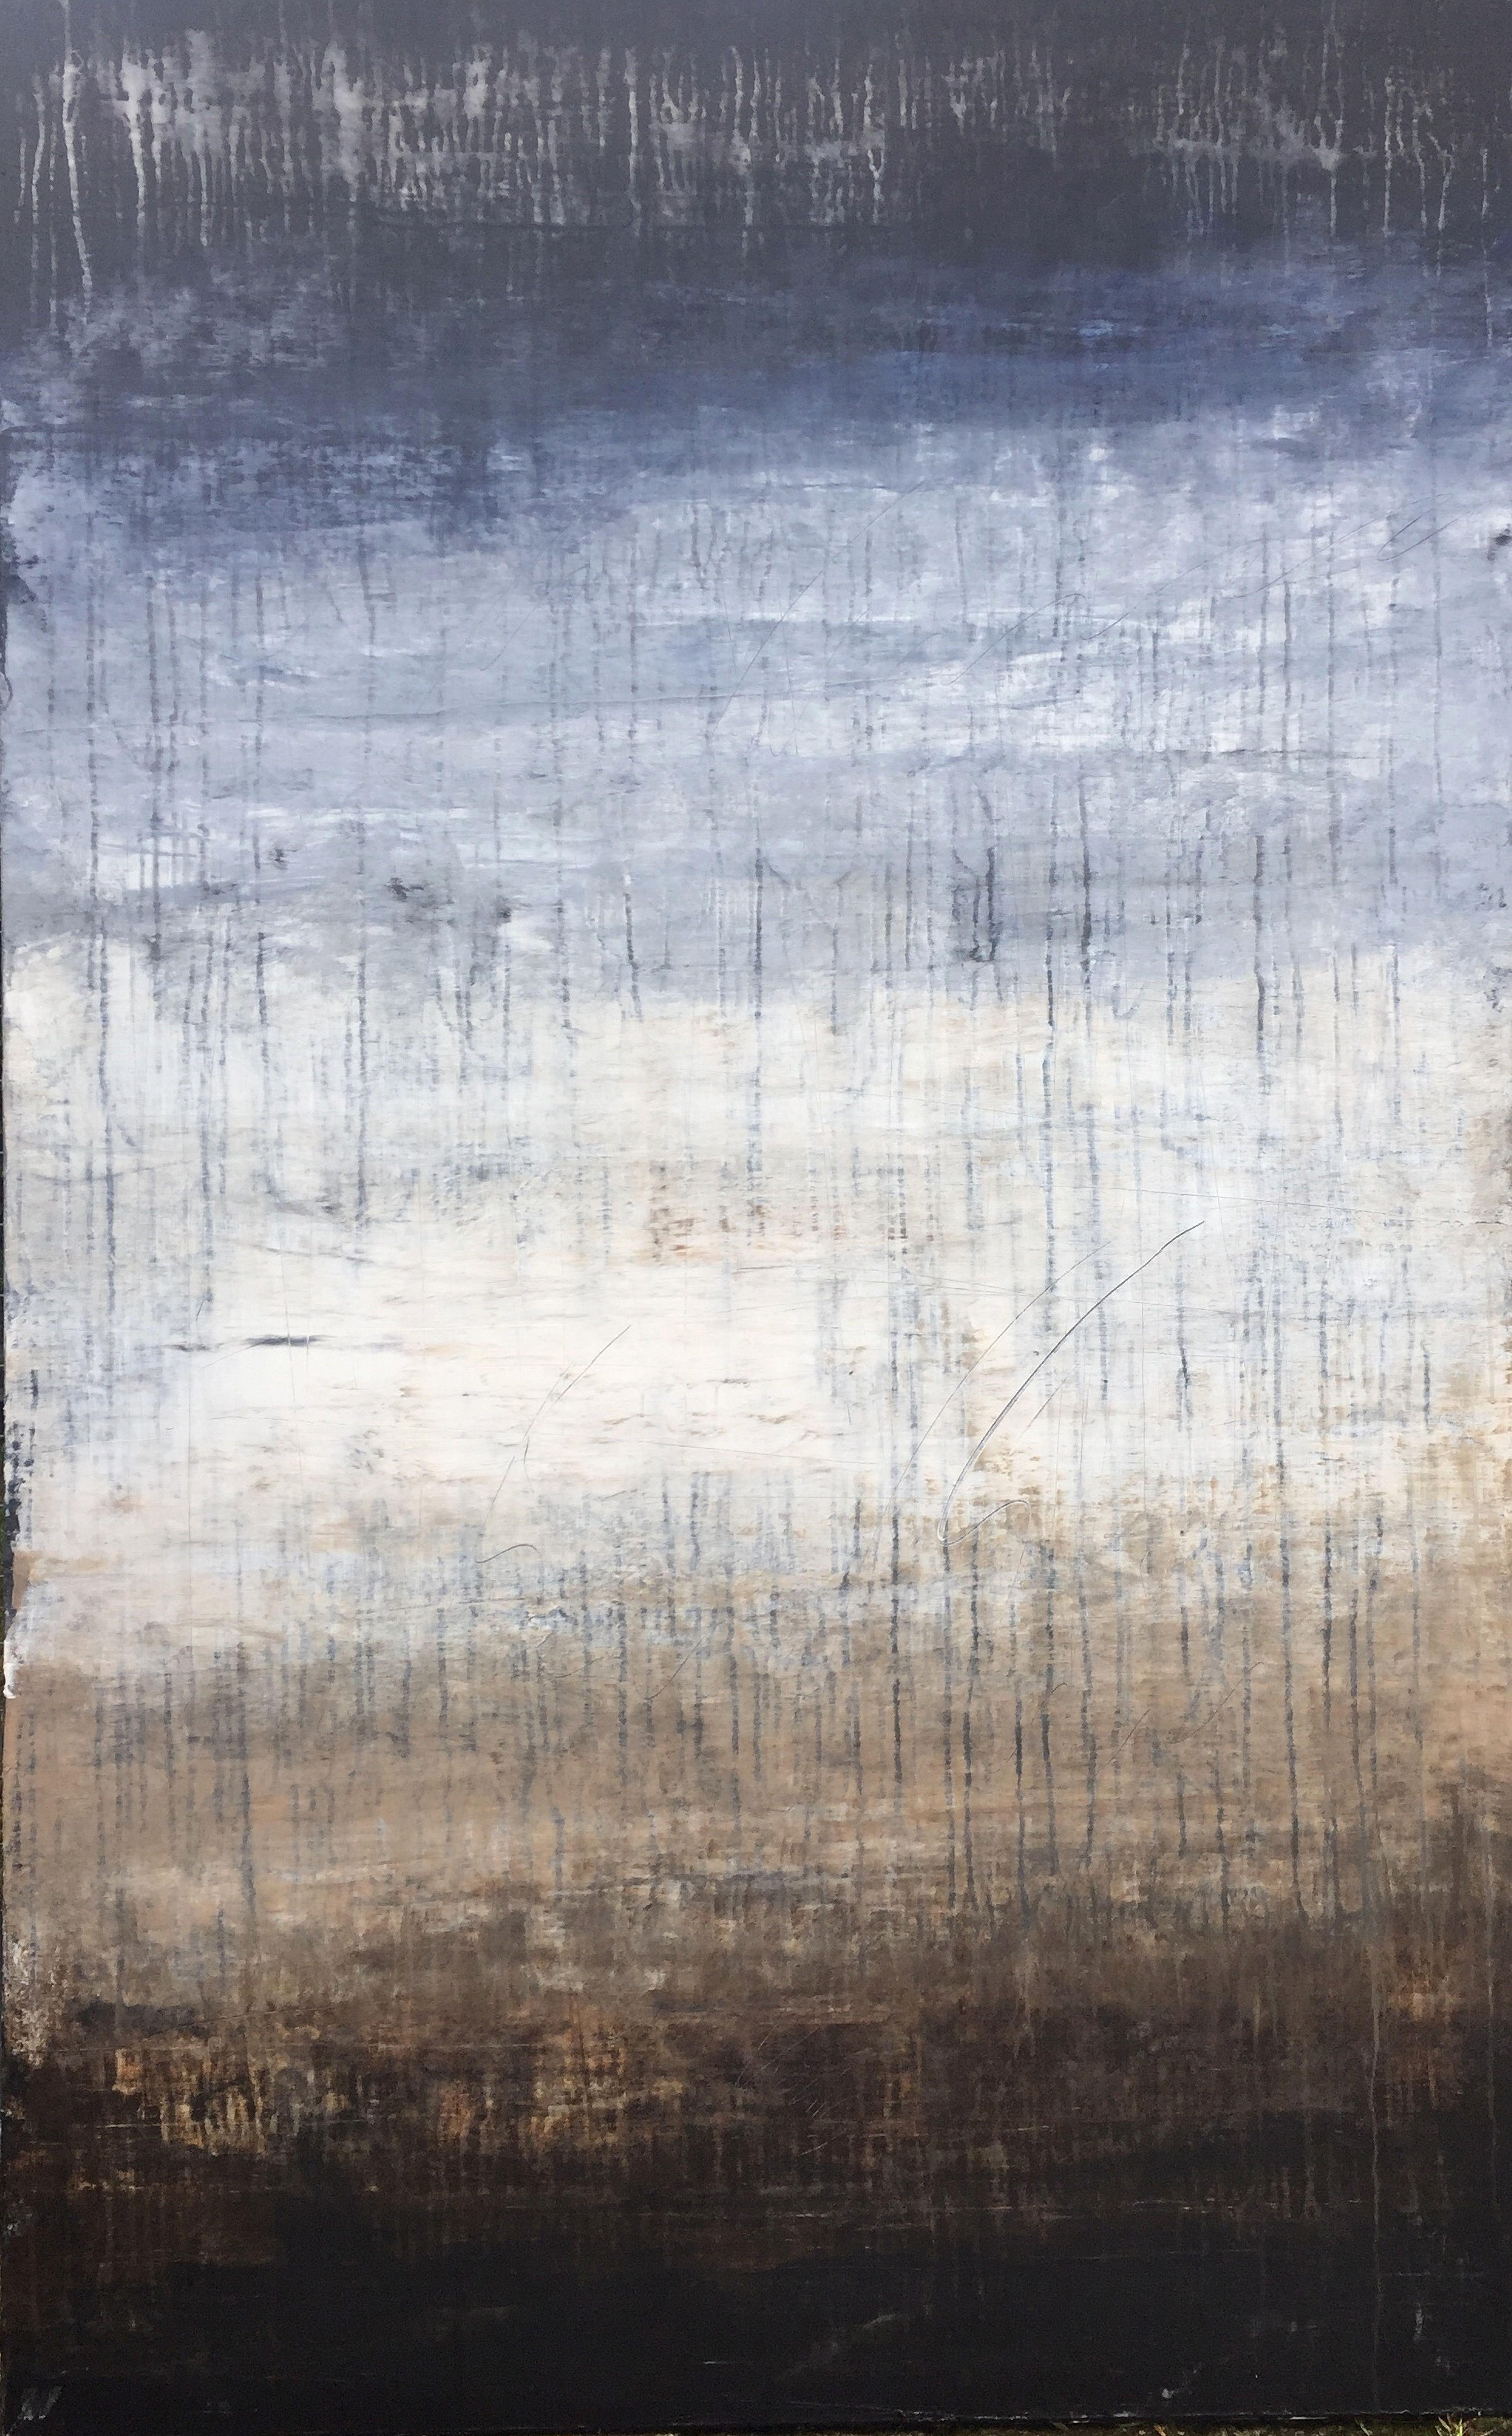 Roger König Landscape Painting - "1160 blue/white/brown elegance" - Abstract, Painting, 21st Century, Acrylic